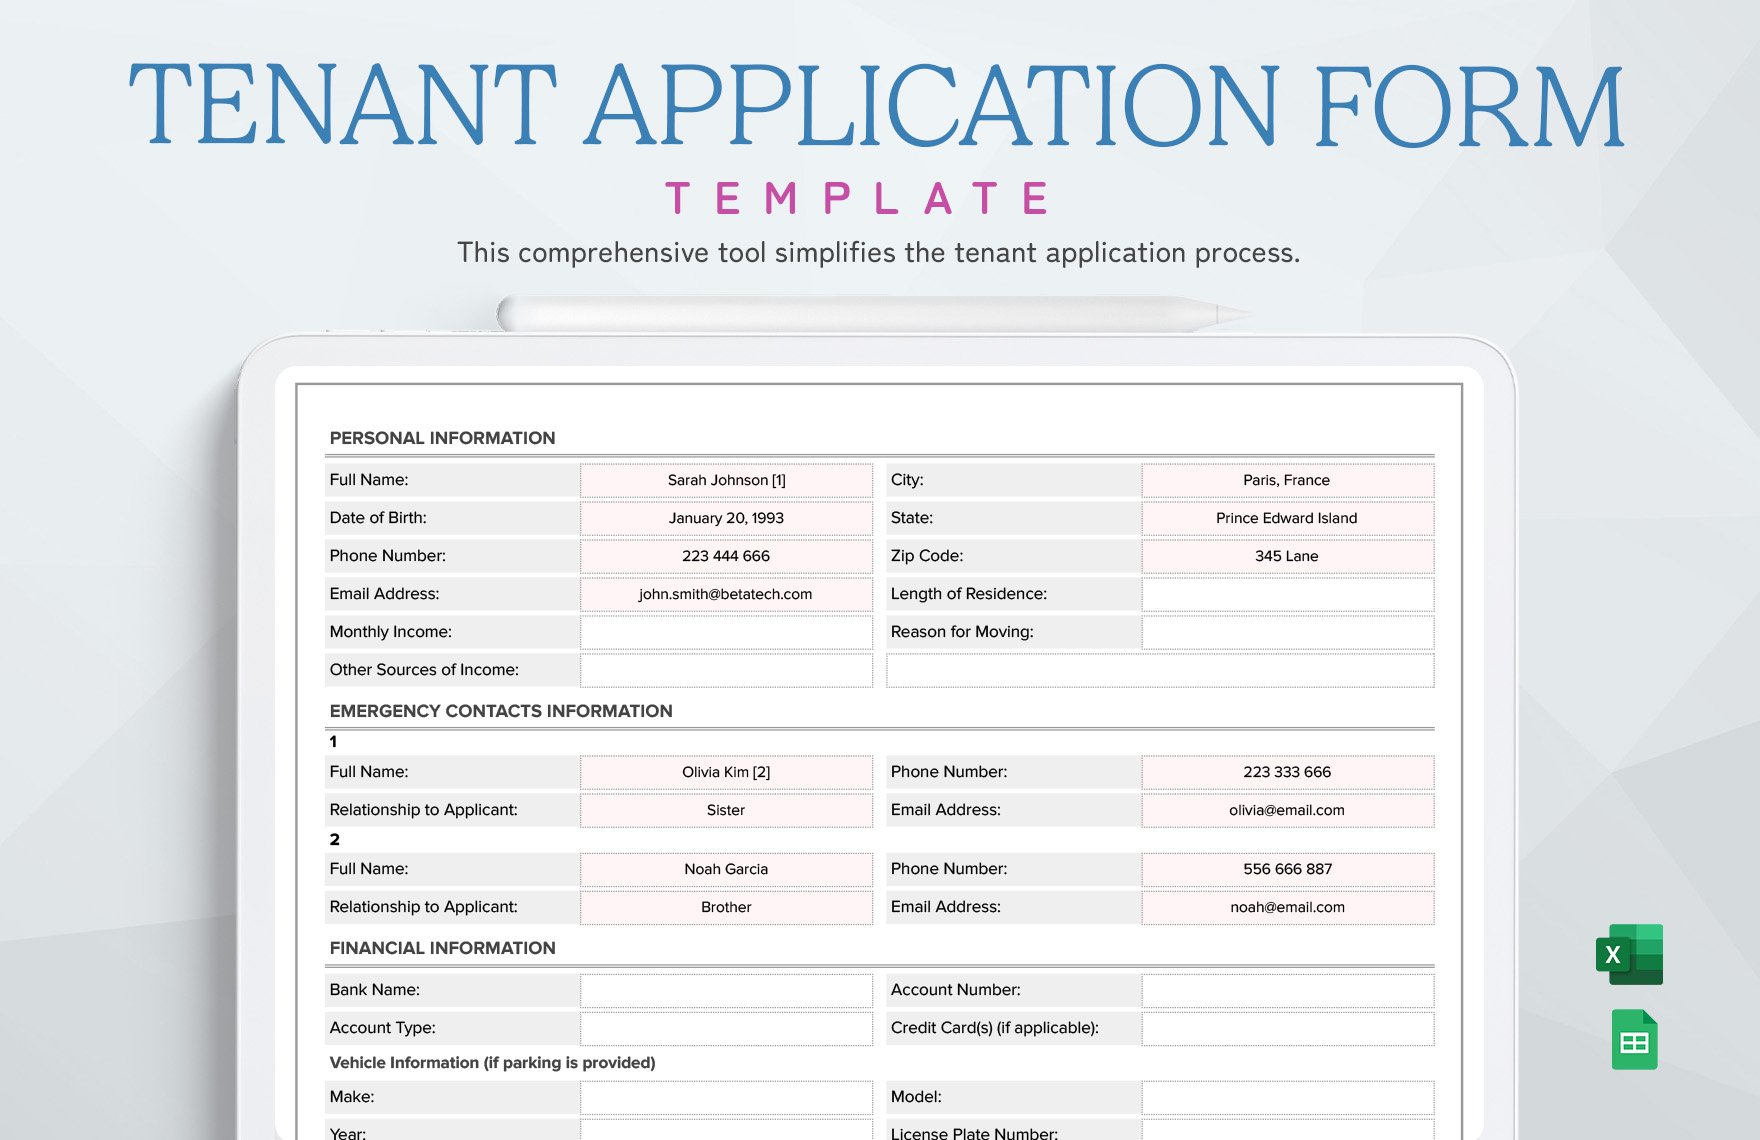 Tenant Application Form Template in Excel, Google Sheets